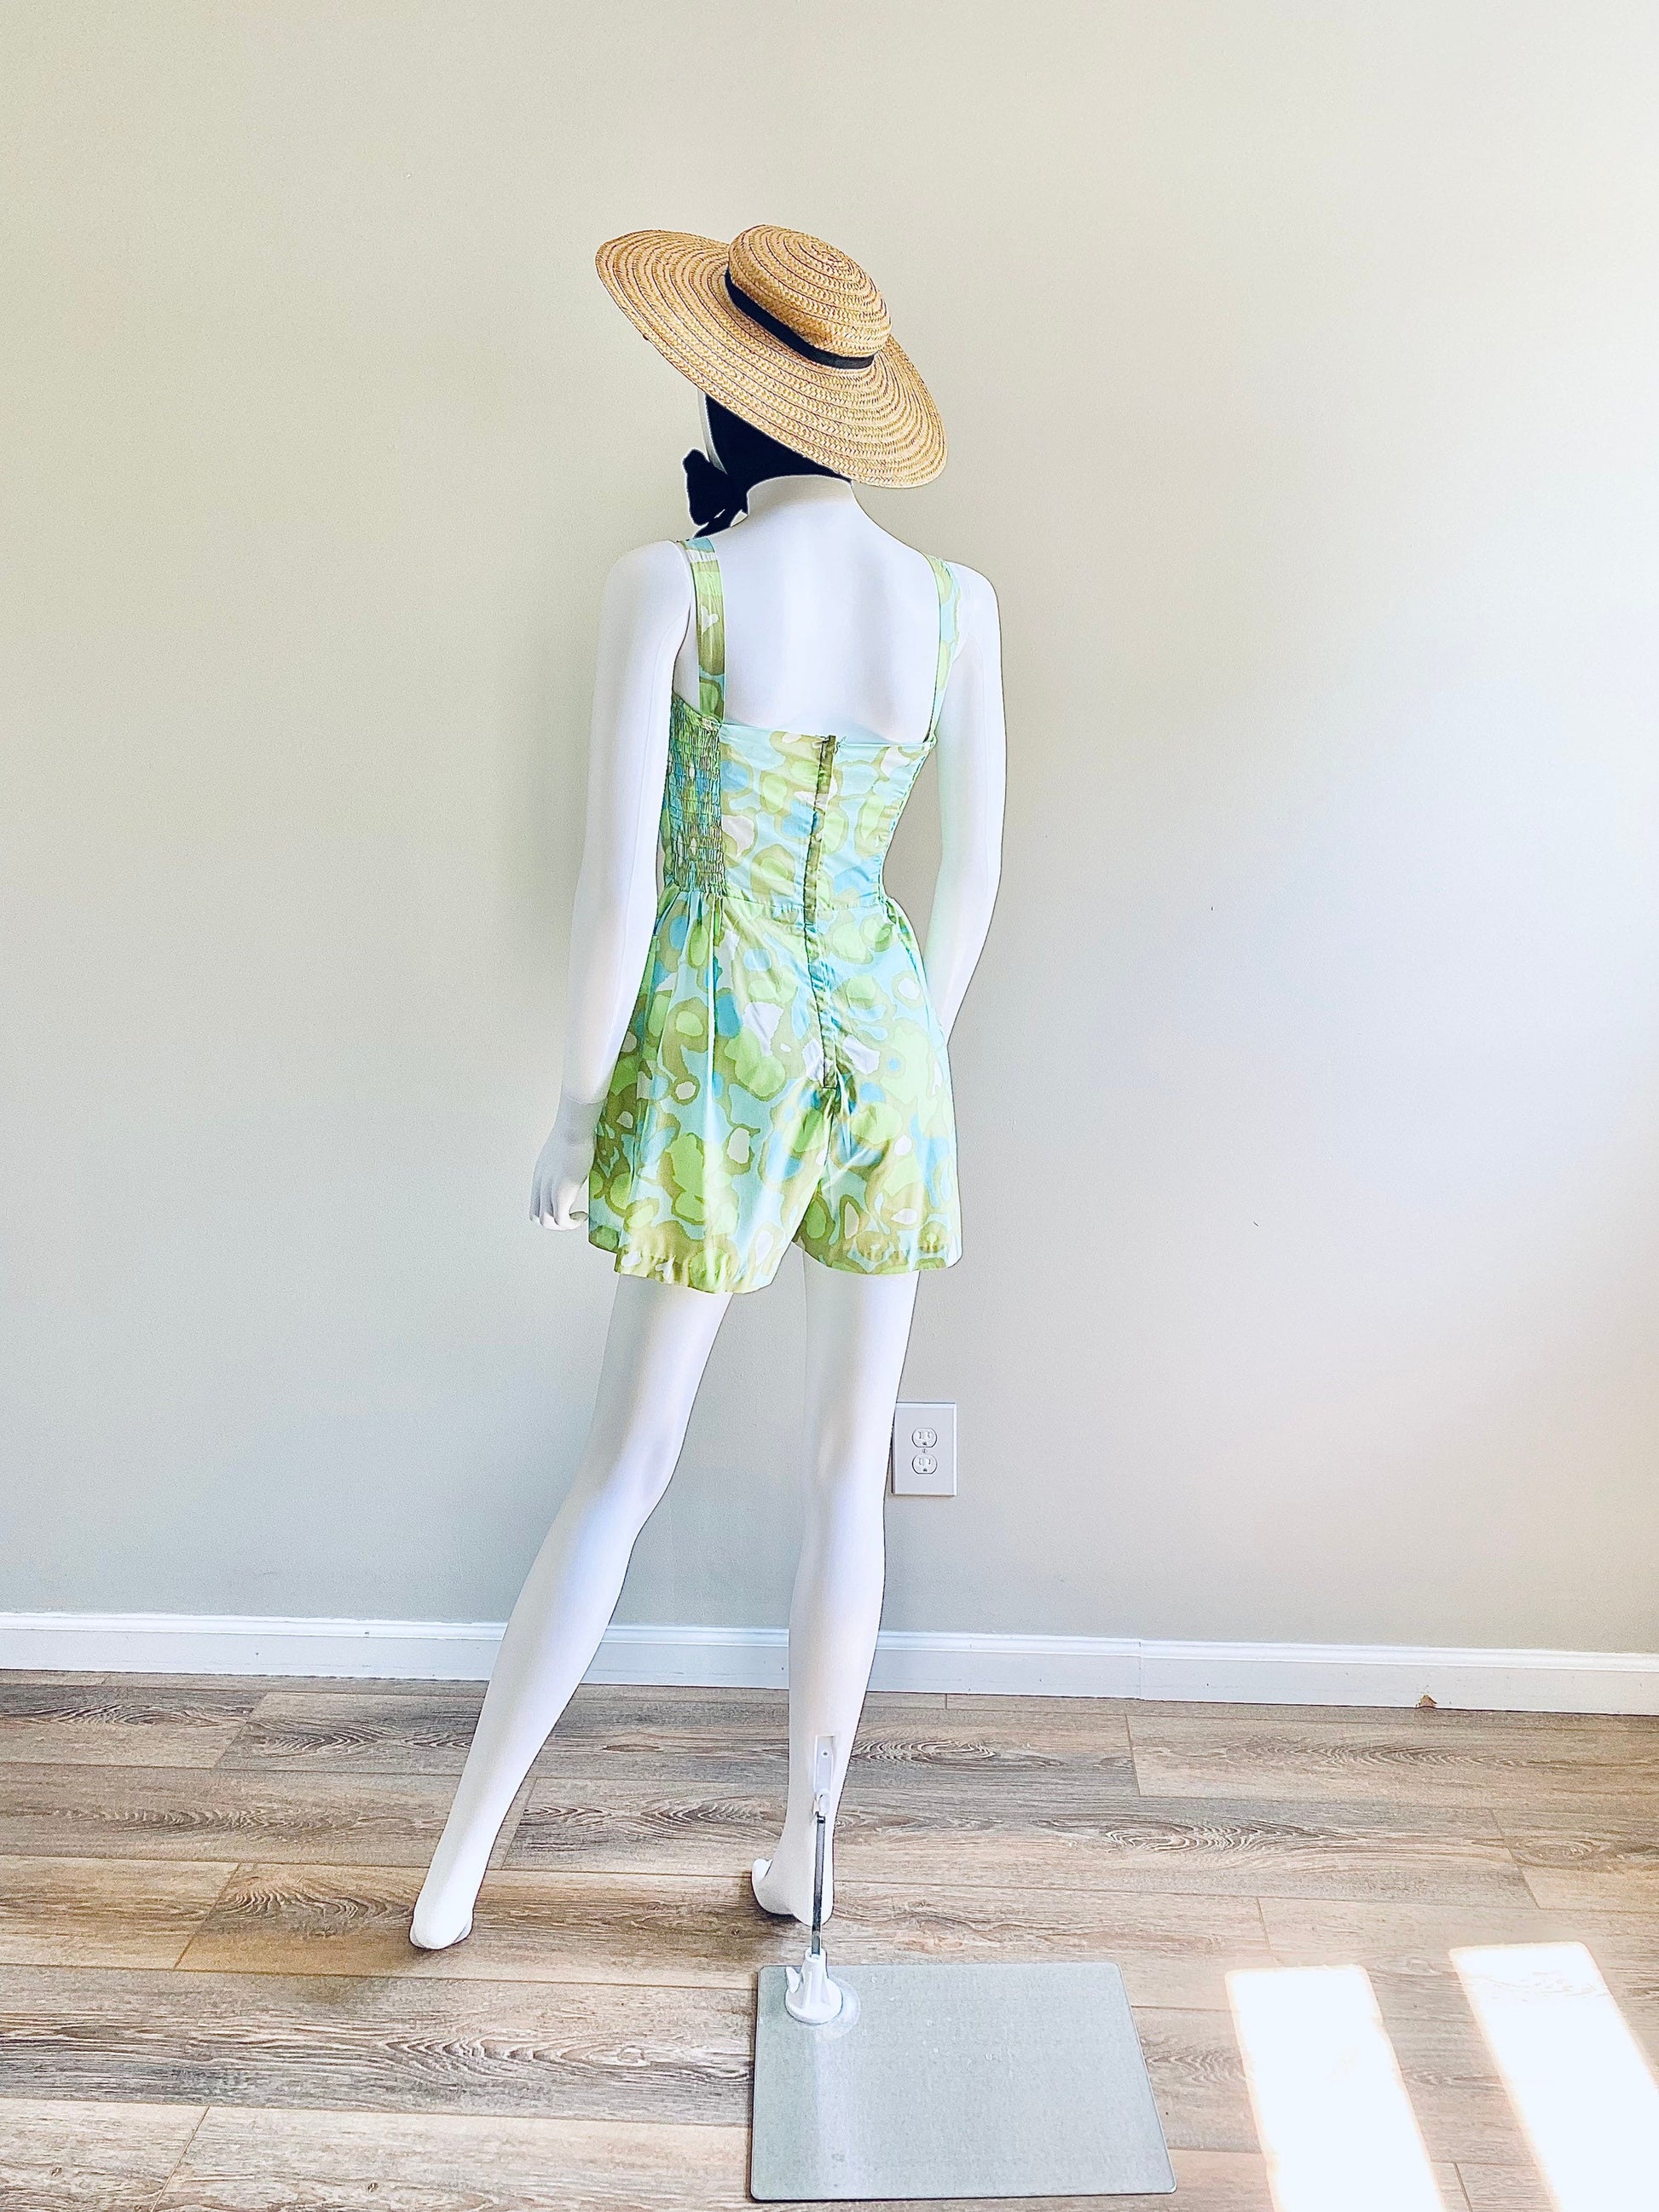 Vintage 1950s Abstract Print Playsuit / 50s romper Size S